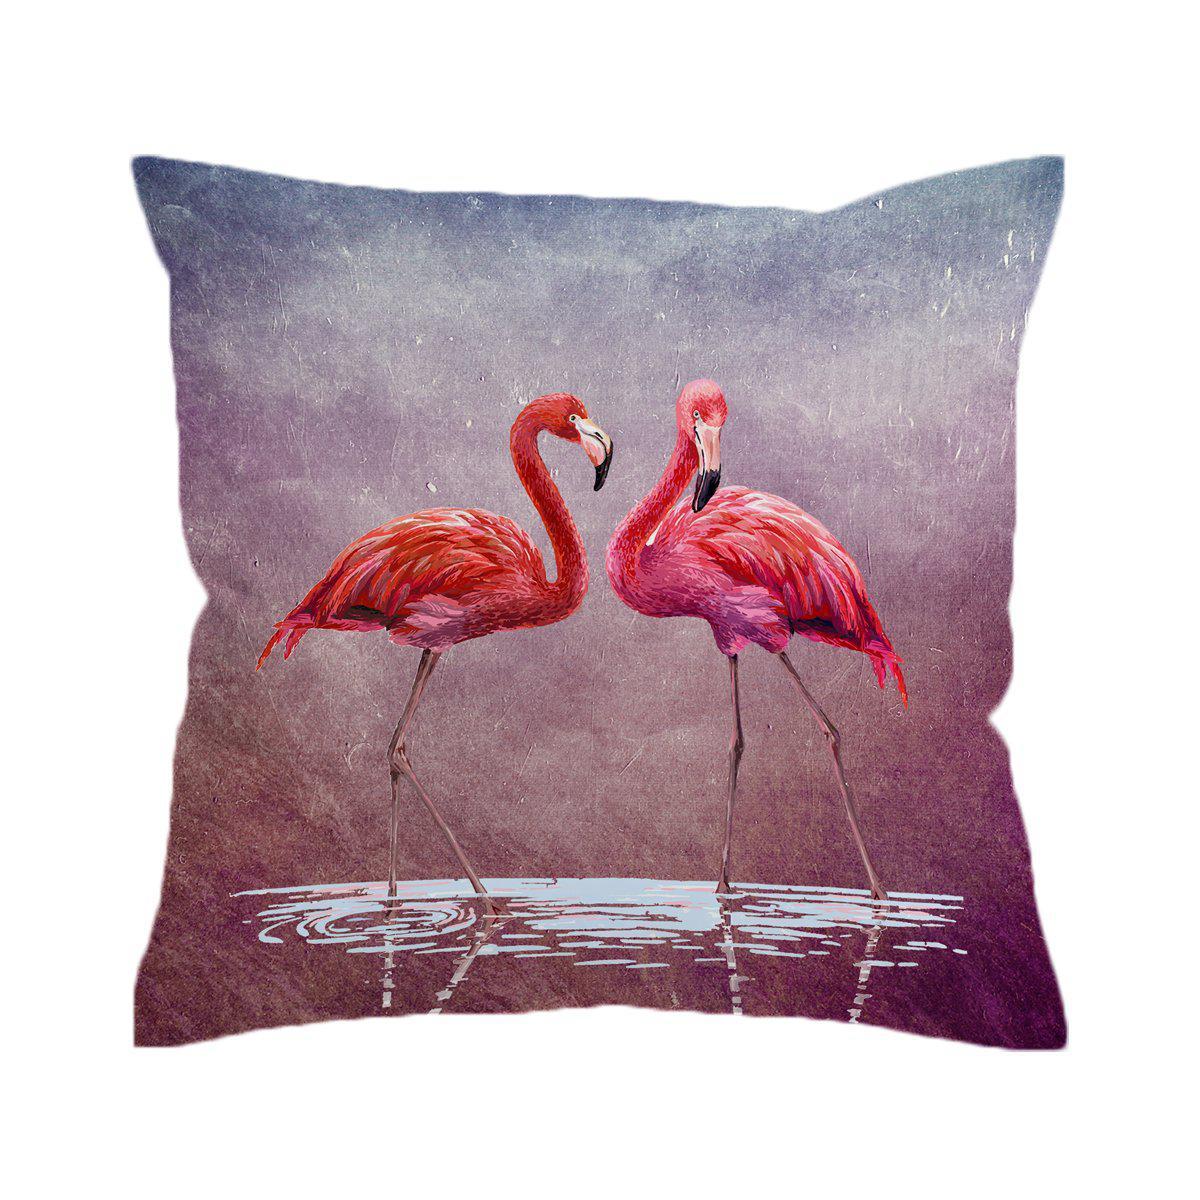 Ladies in Pink Pillow Cover